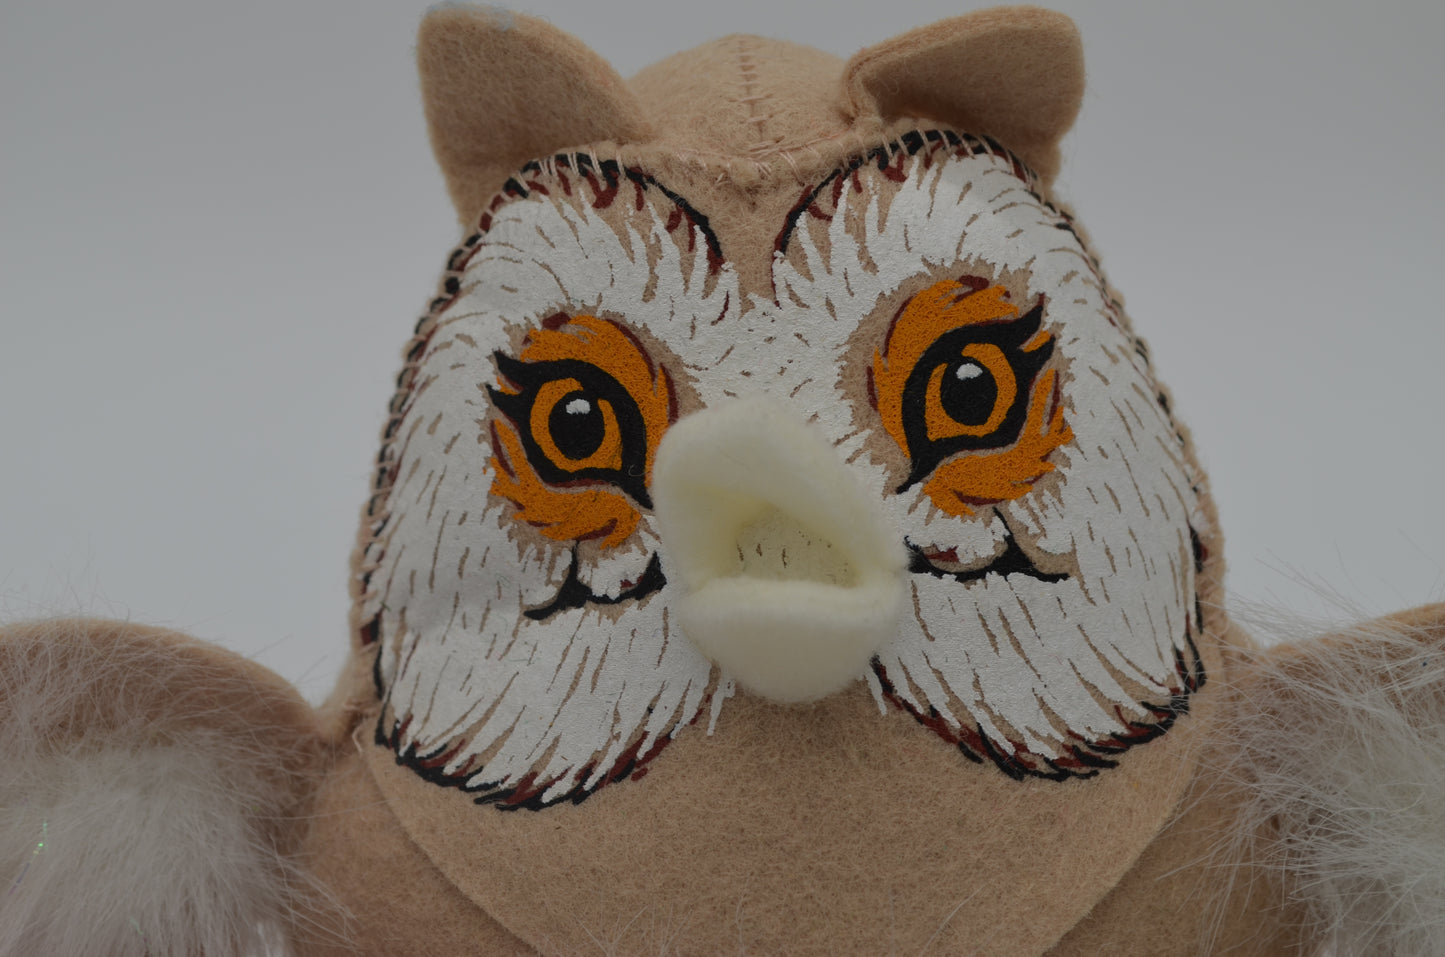 8" Berry Wise Owl 947208 Annalee